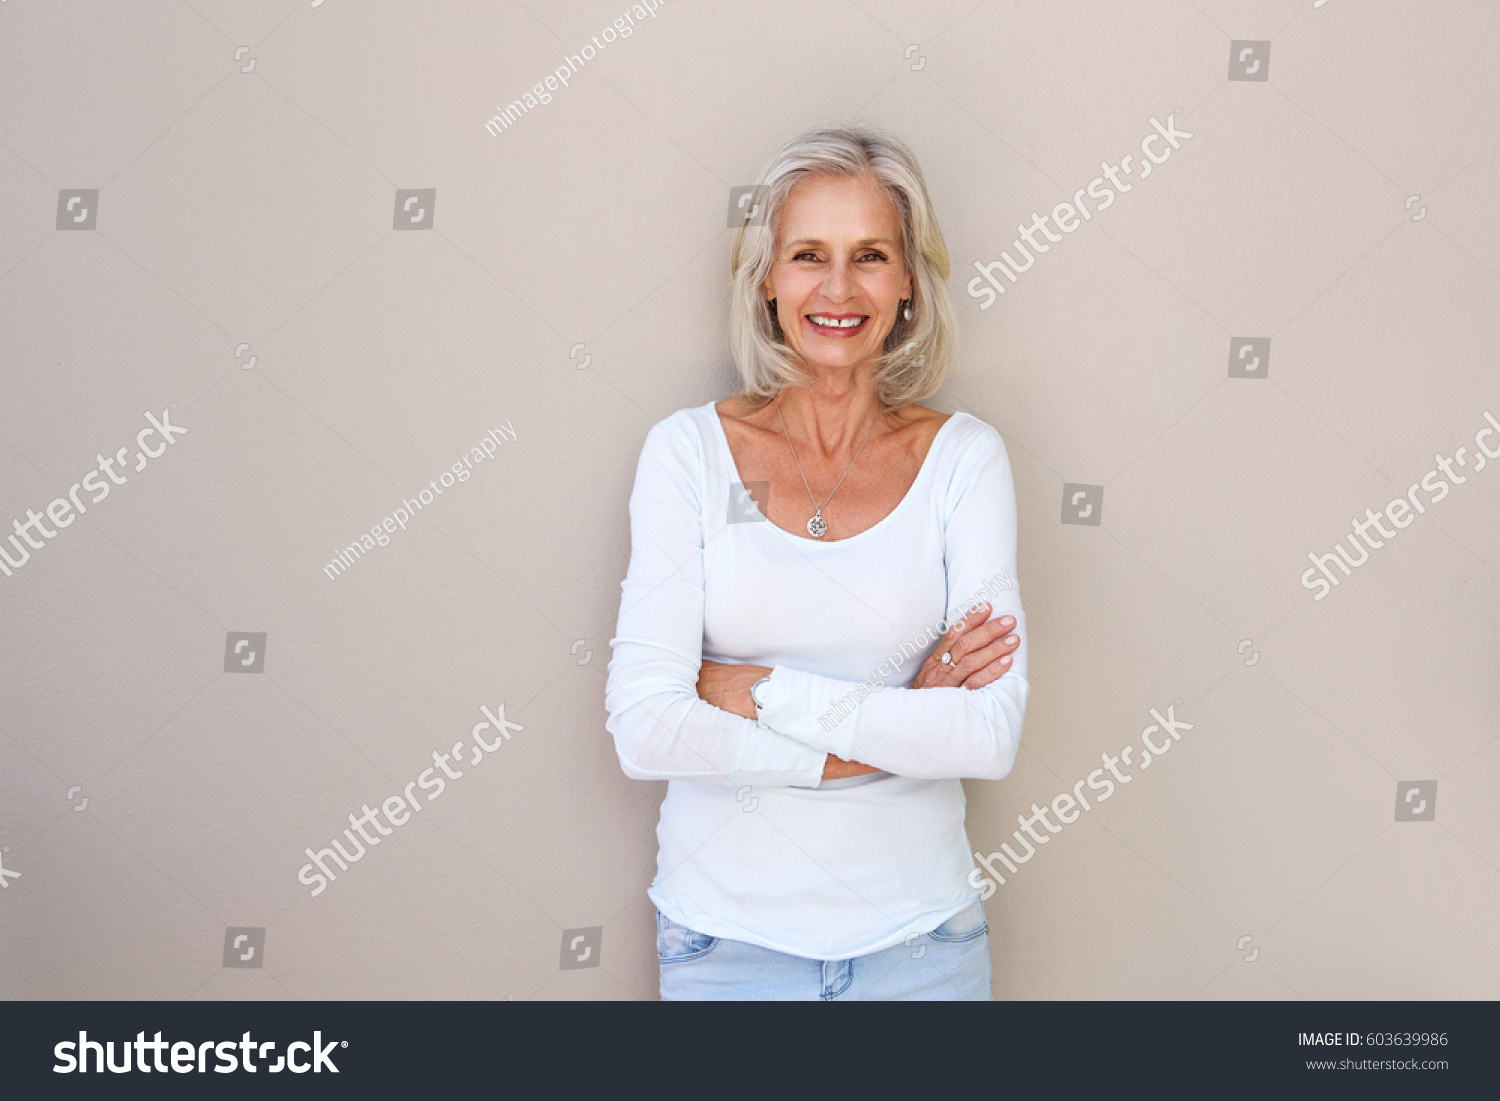 Portrait of beautiful older woman standing and smiling with arms crossed #603639986